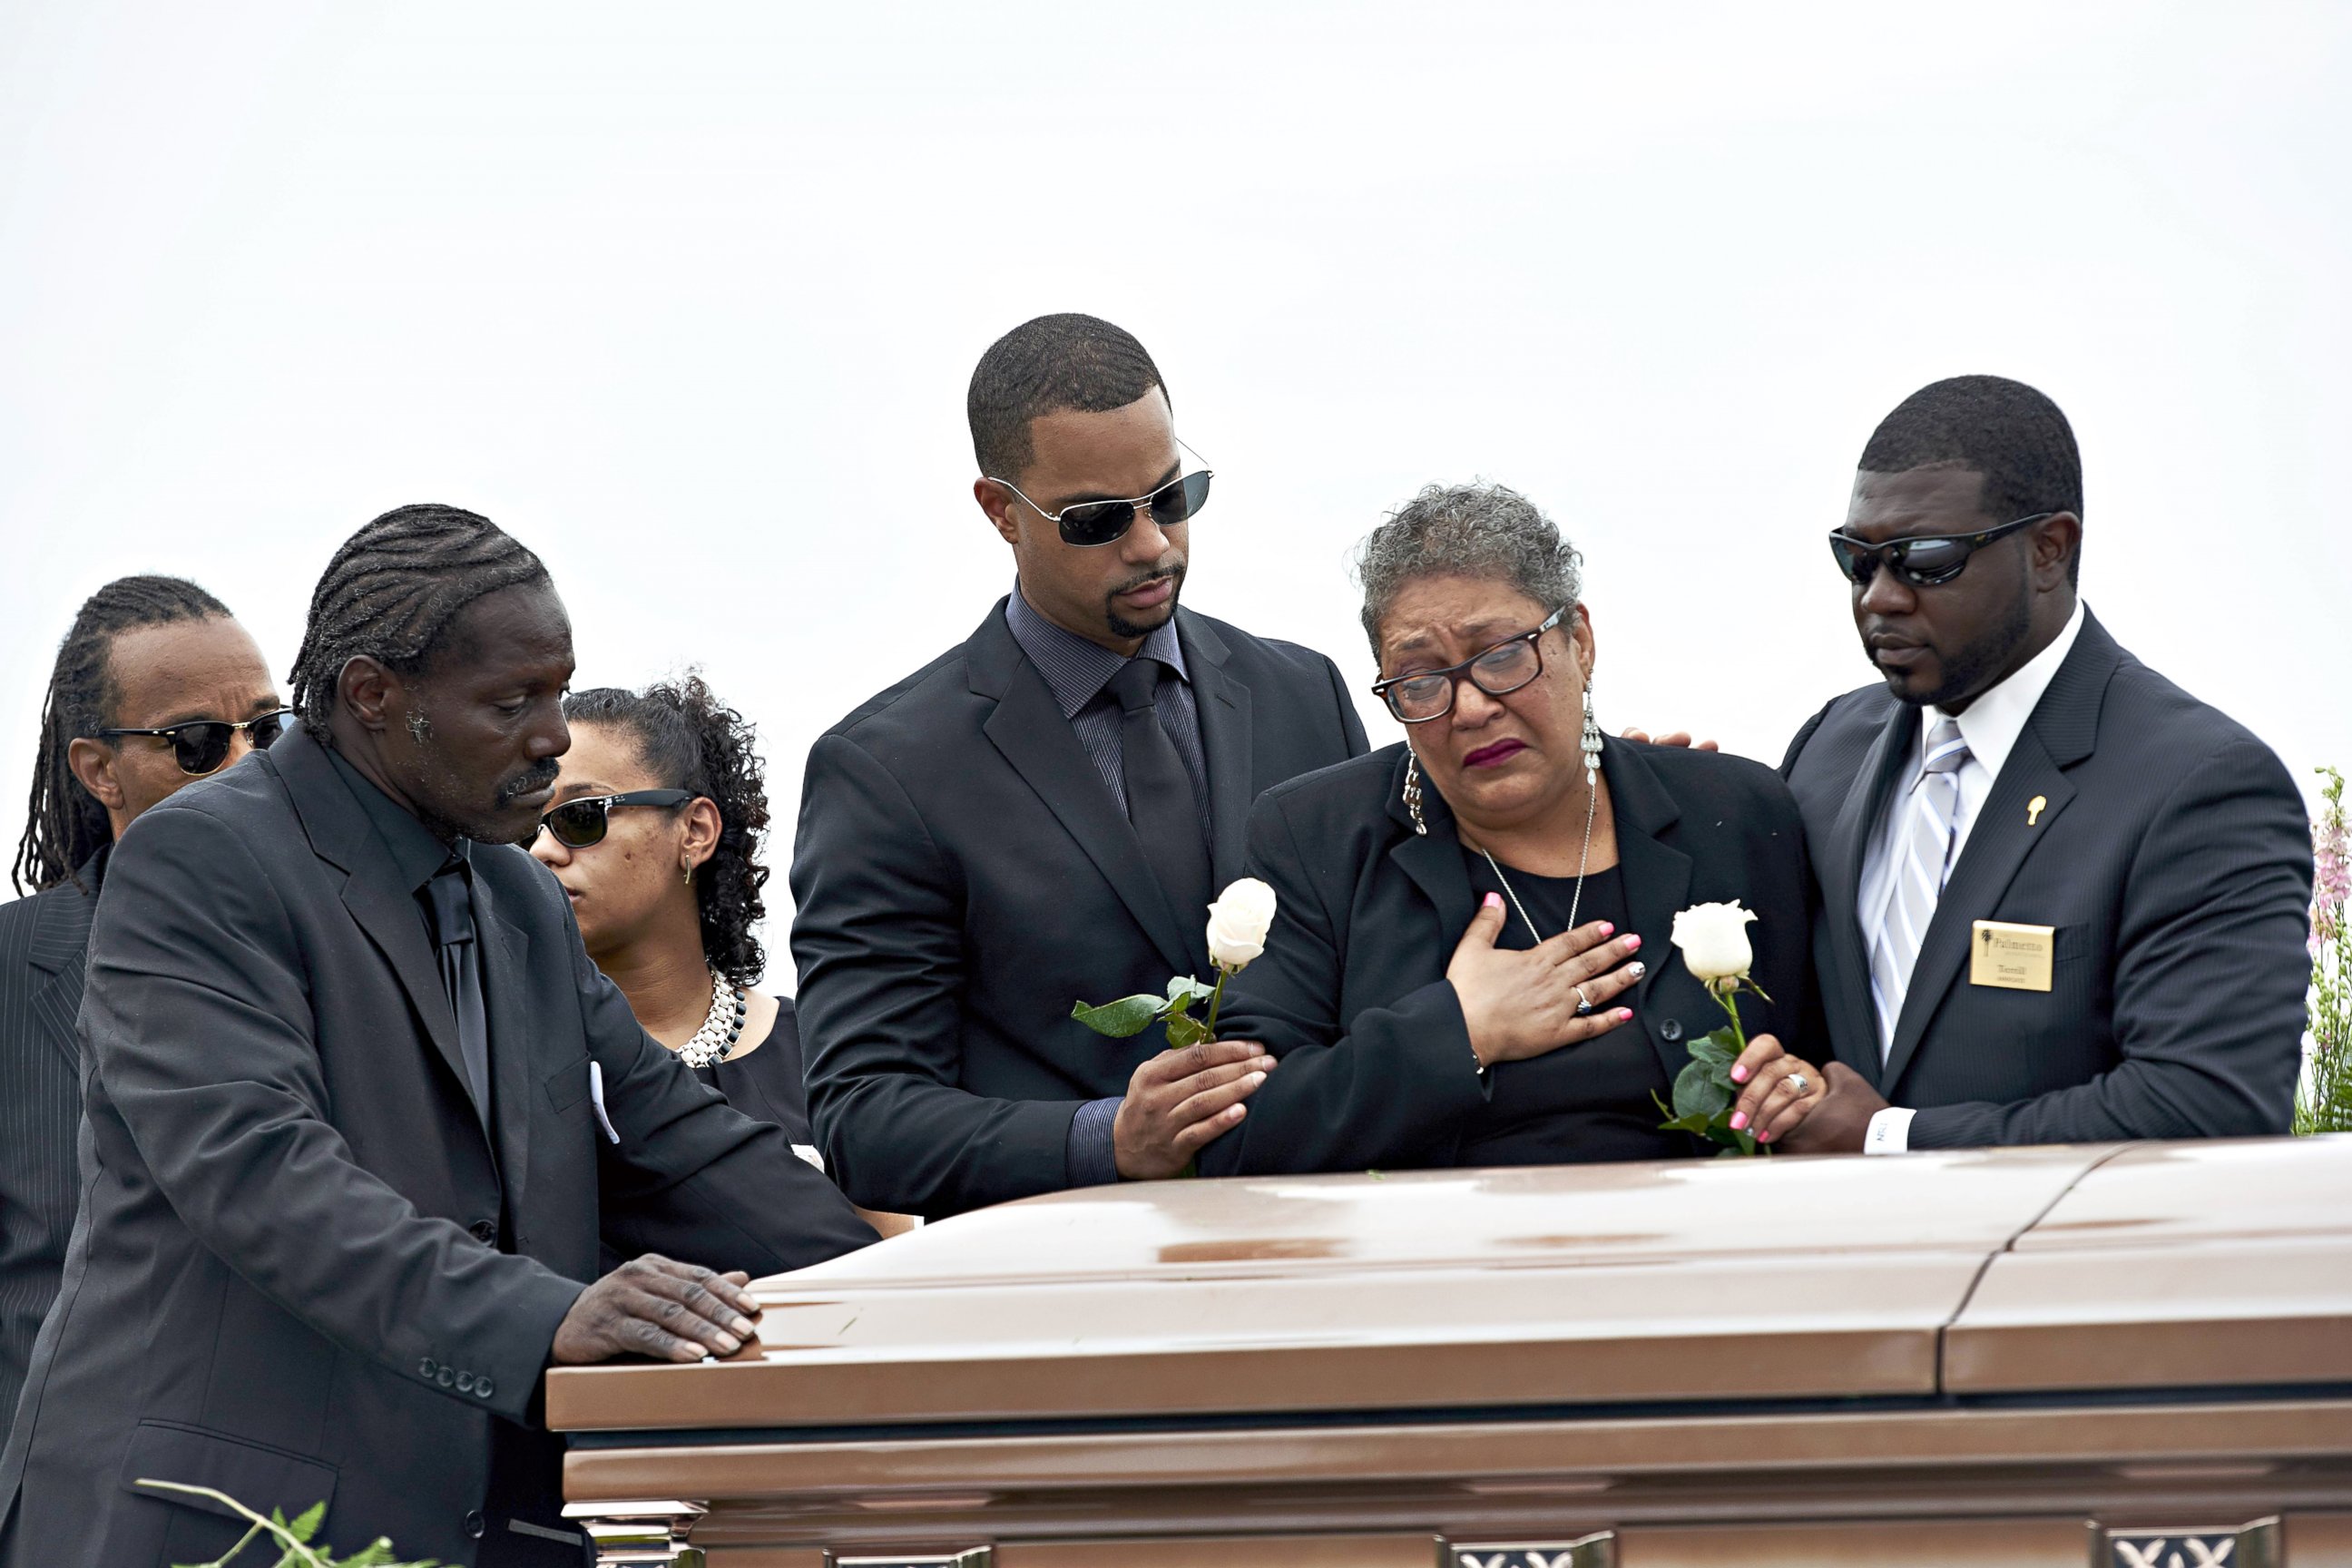 PHOTO: Sharon Risher, 2nd from right, and Gary Washington, left, pay their respects at the casket of their mother, Ethel Lance, 70, before her burial at the AME Church cemetery, June 25, 2015, in North Charleston, S.C.